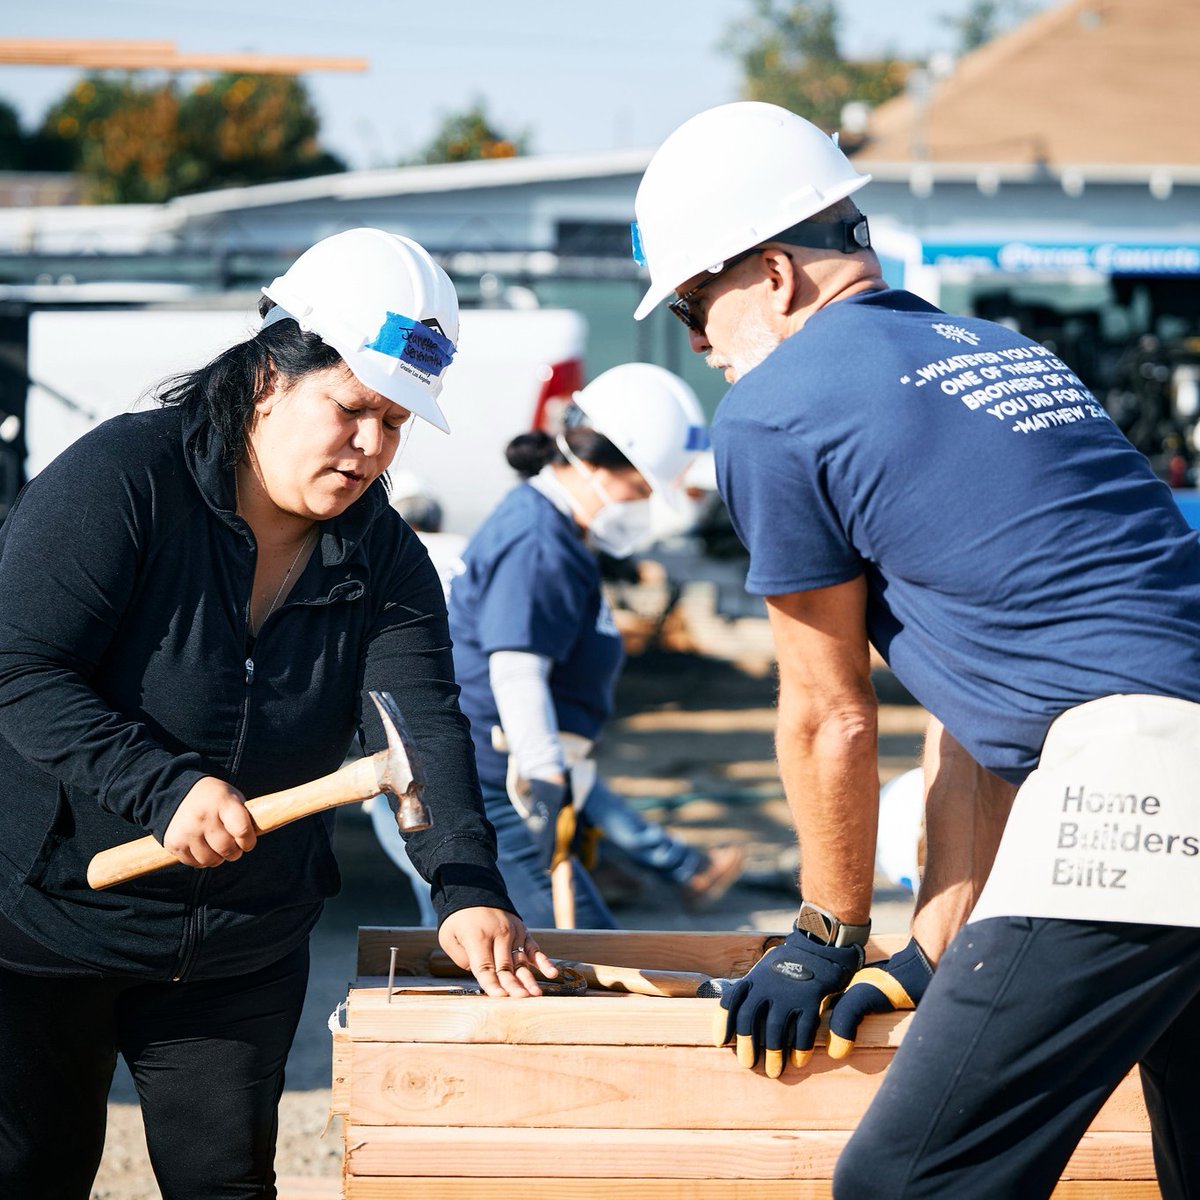 Saturday build day opportunity open NOW- May 4th! ⚒️🏘️ #LA2050 Habitat LA is proud to partner with @LA2050 and host two build sites on May 4th! We have spots available in #Lancaster and South #LosAngeles. Create an account & use join code LA2050 here: bit.ly/3U3lopg